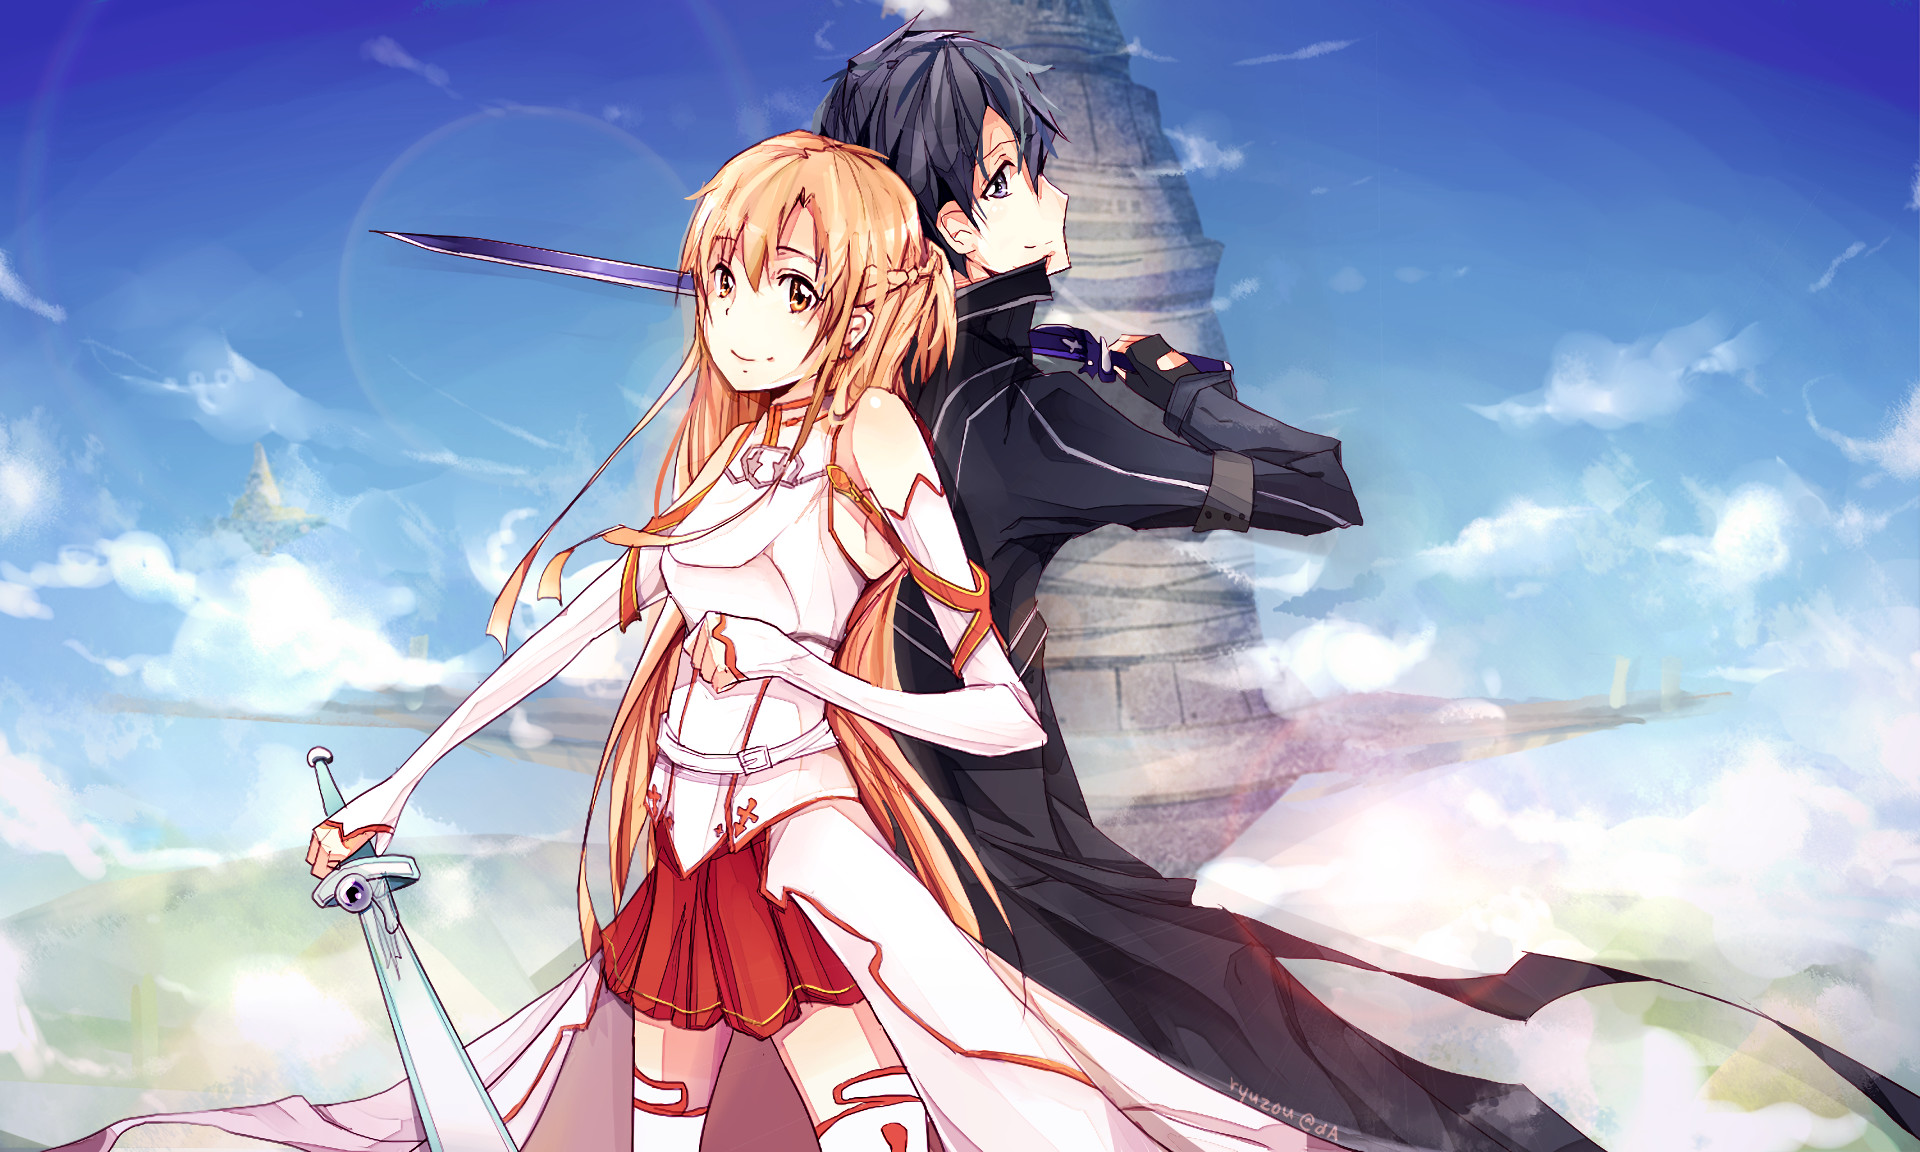 1920x1152 1106 Asuna Yuuki HD Wallpapers | Backgrounds - Wallpaper Abyss - Page 4